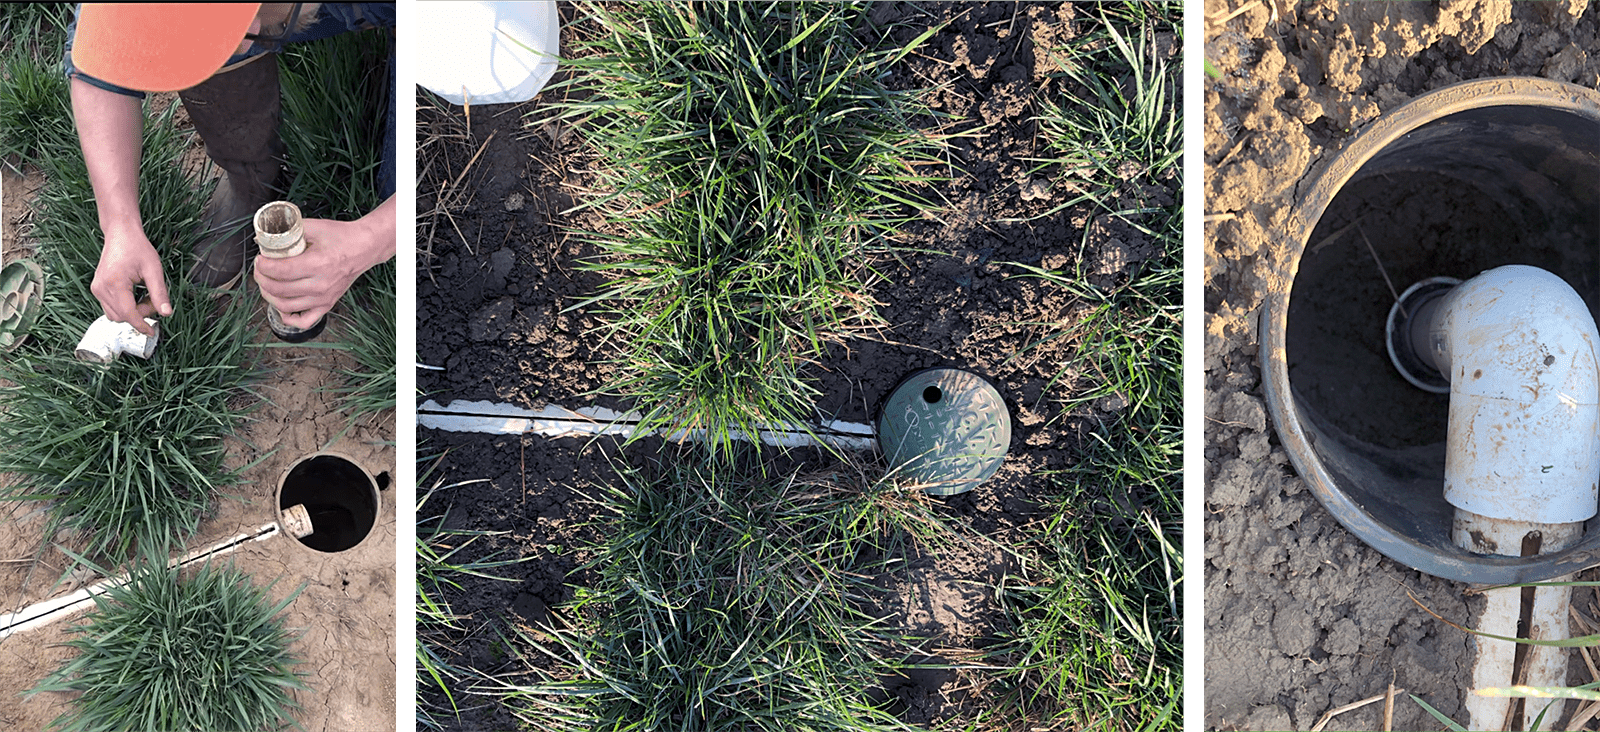 Person collegcts insects from a trap, left; middle, PVC pile with lengthwise slit partially buried in field, round cover in center; right, pipe corner goes into circular well